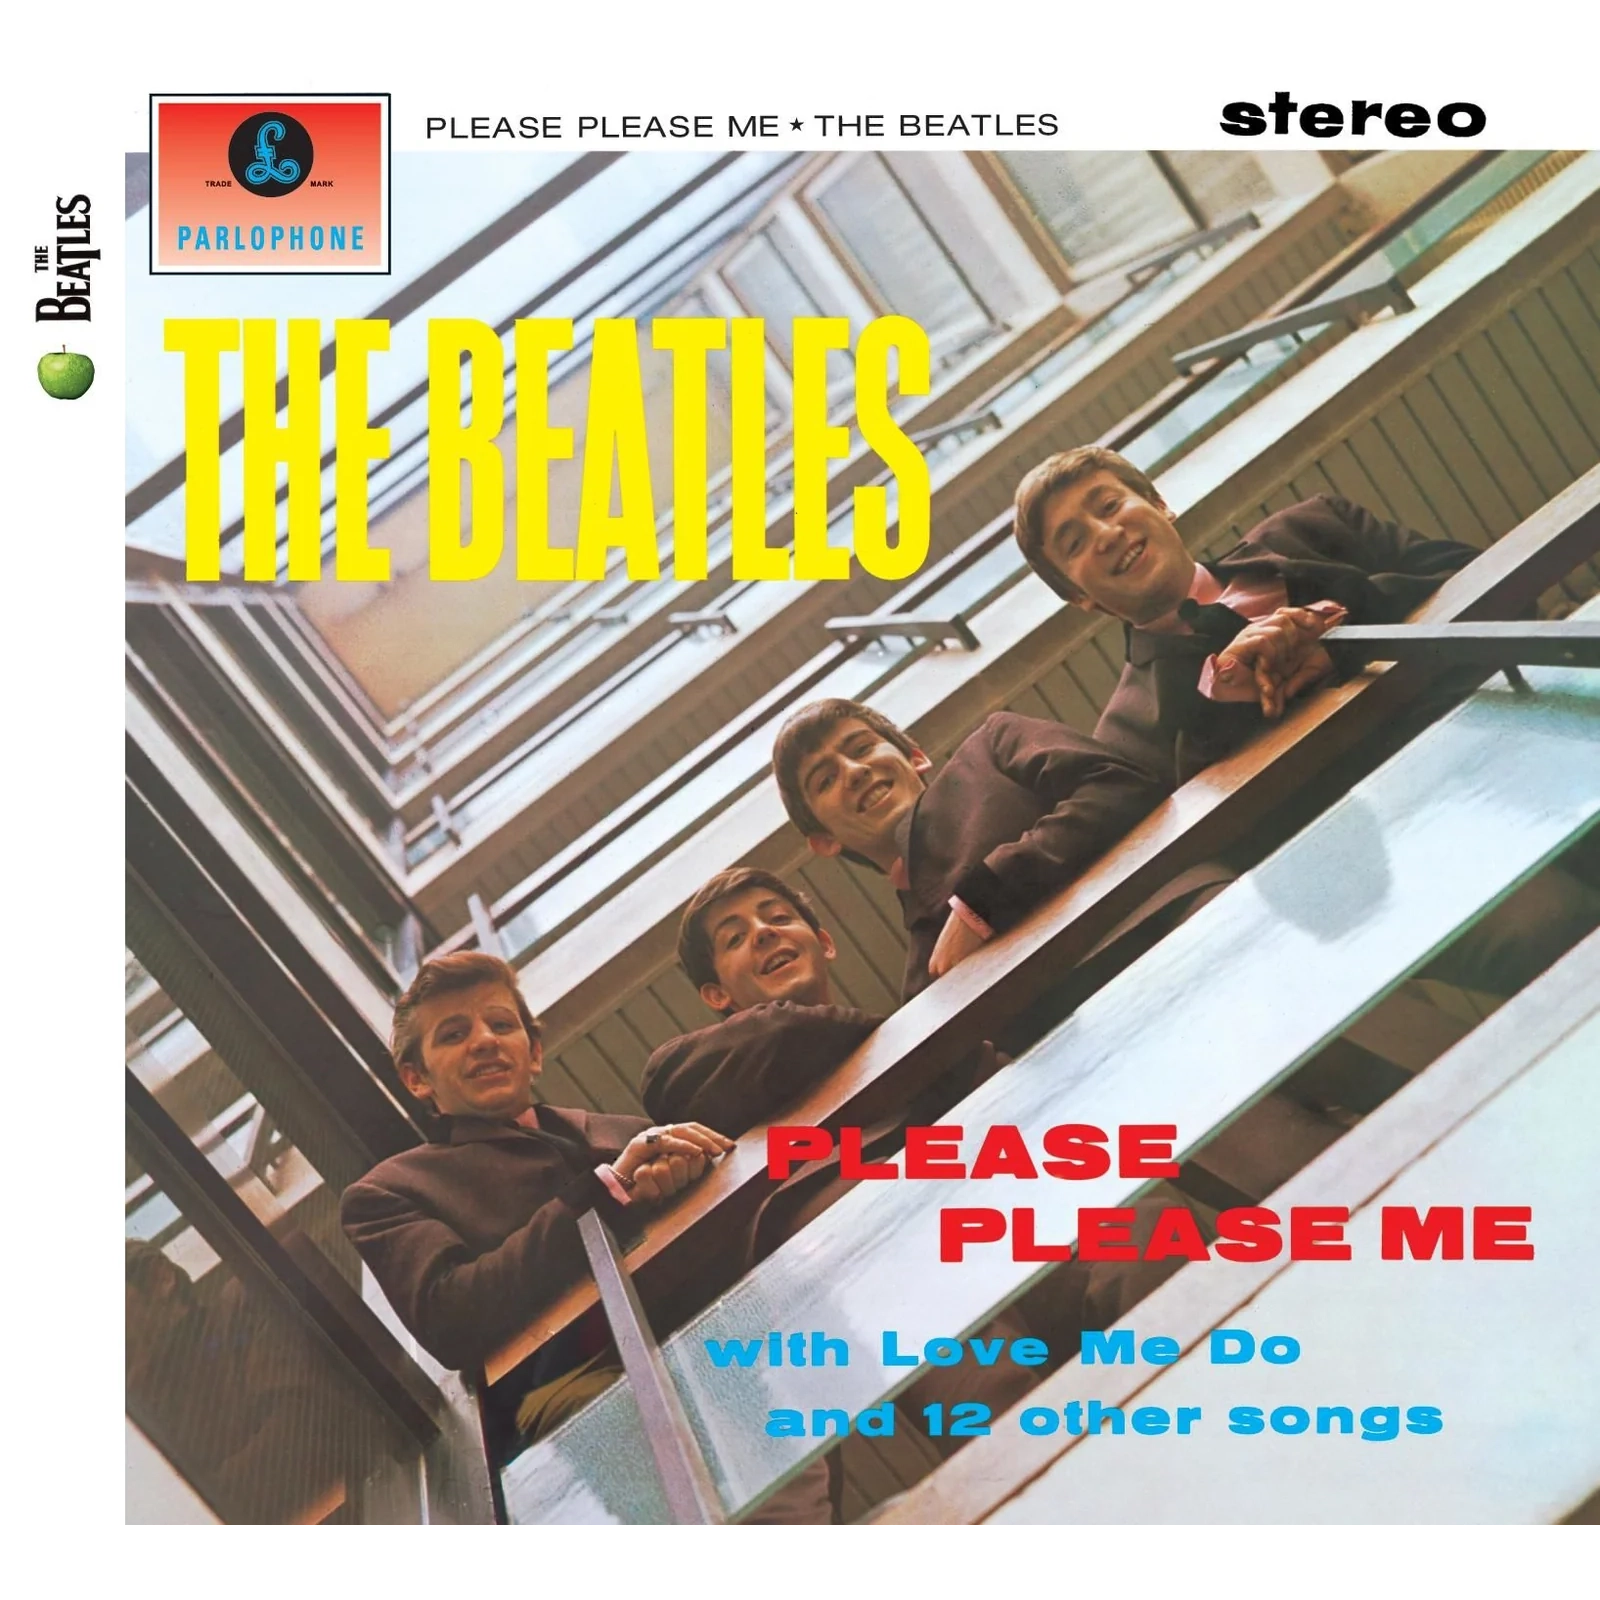 The Beatles - Please Please Me: Remastered.